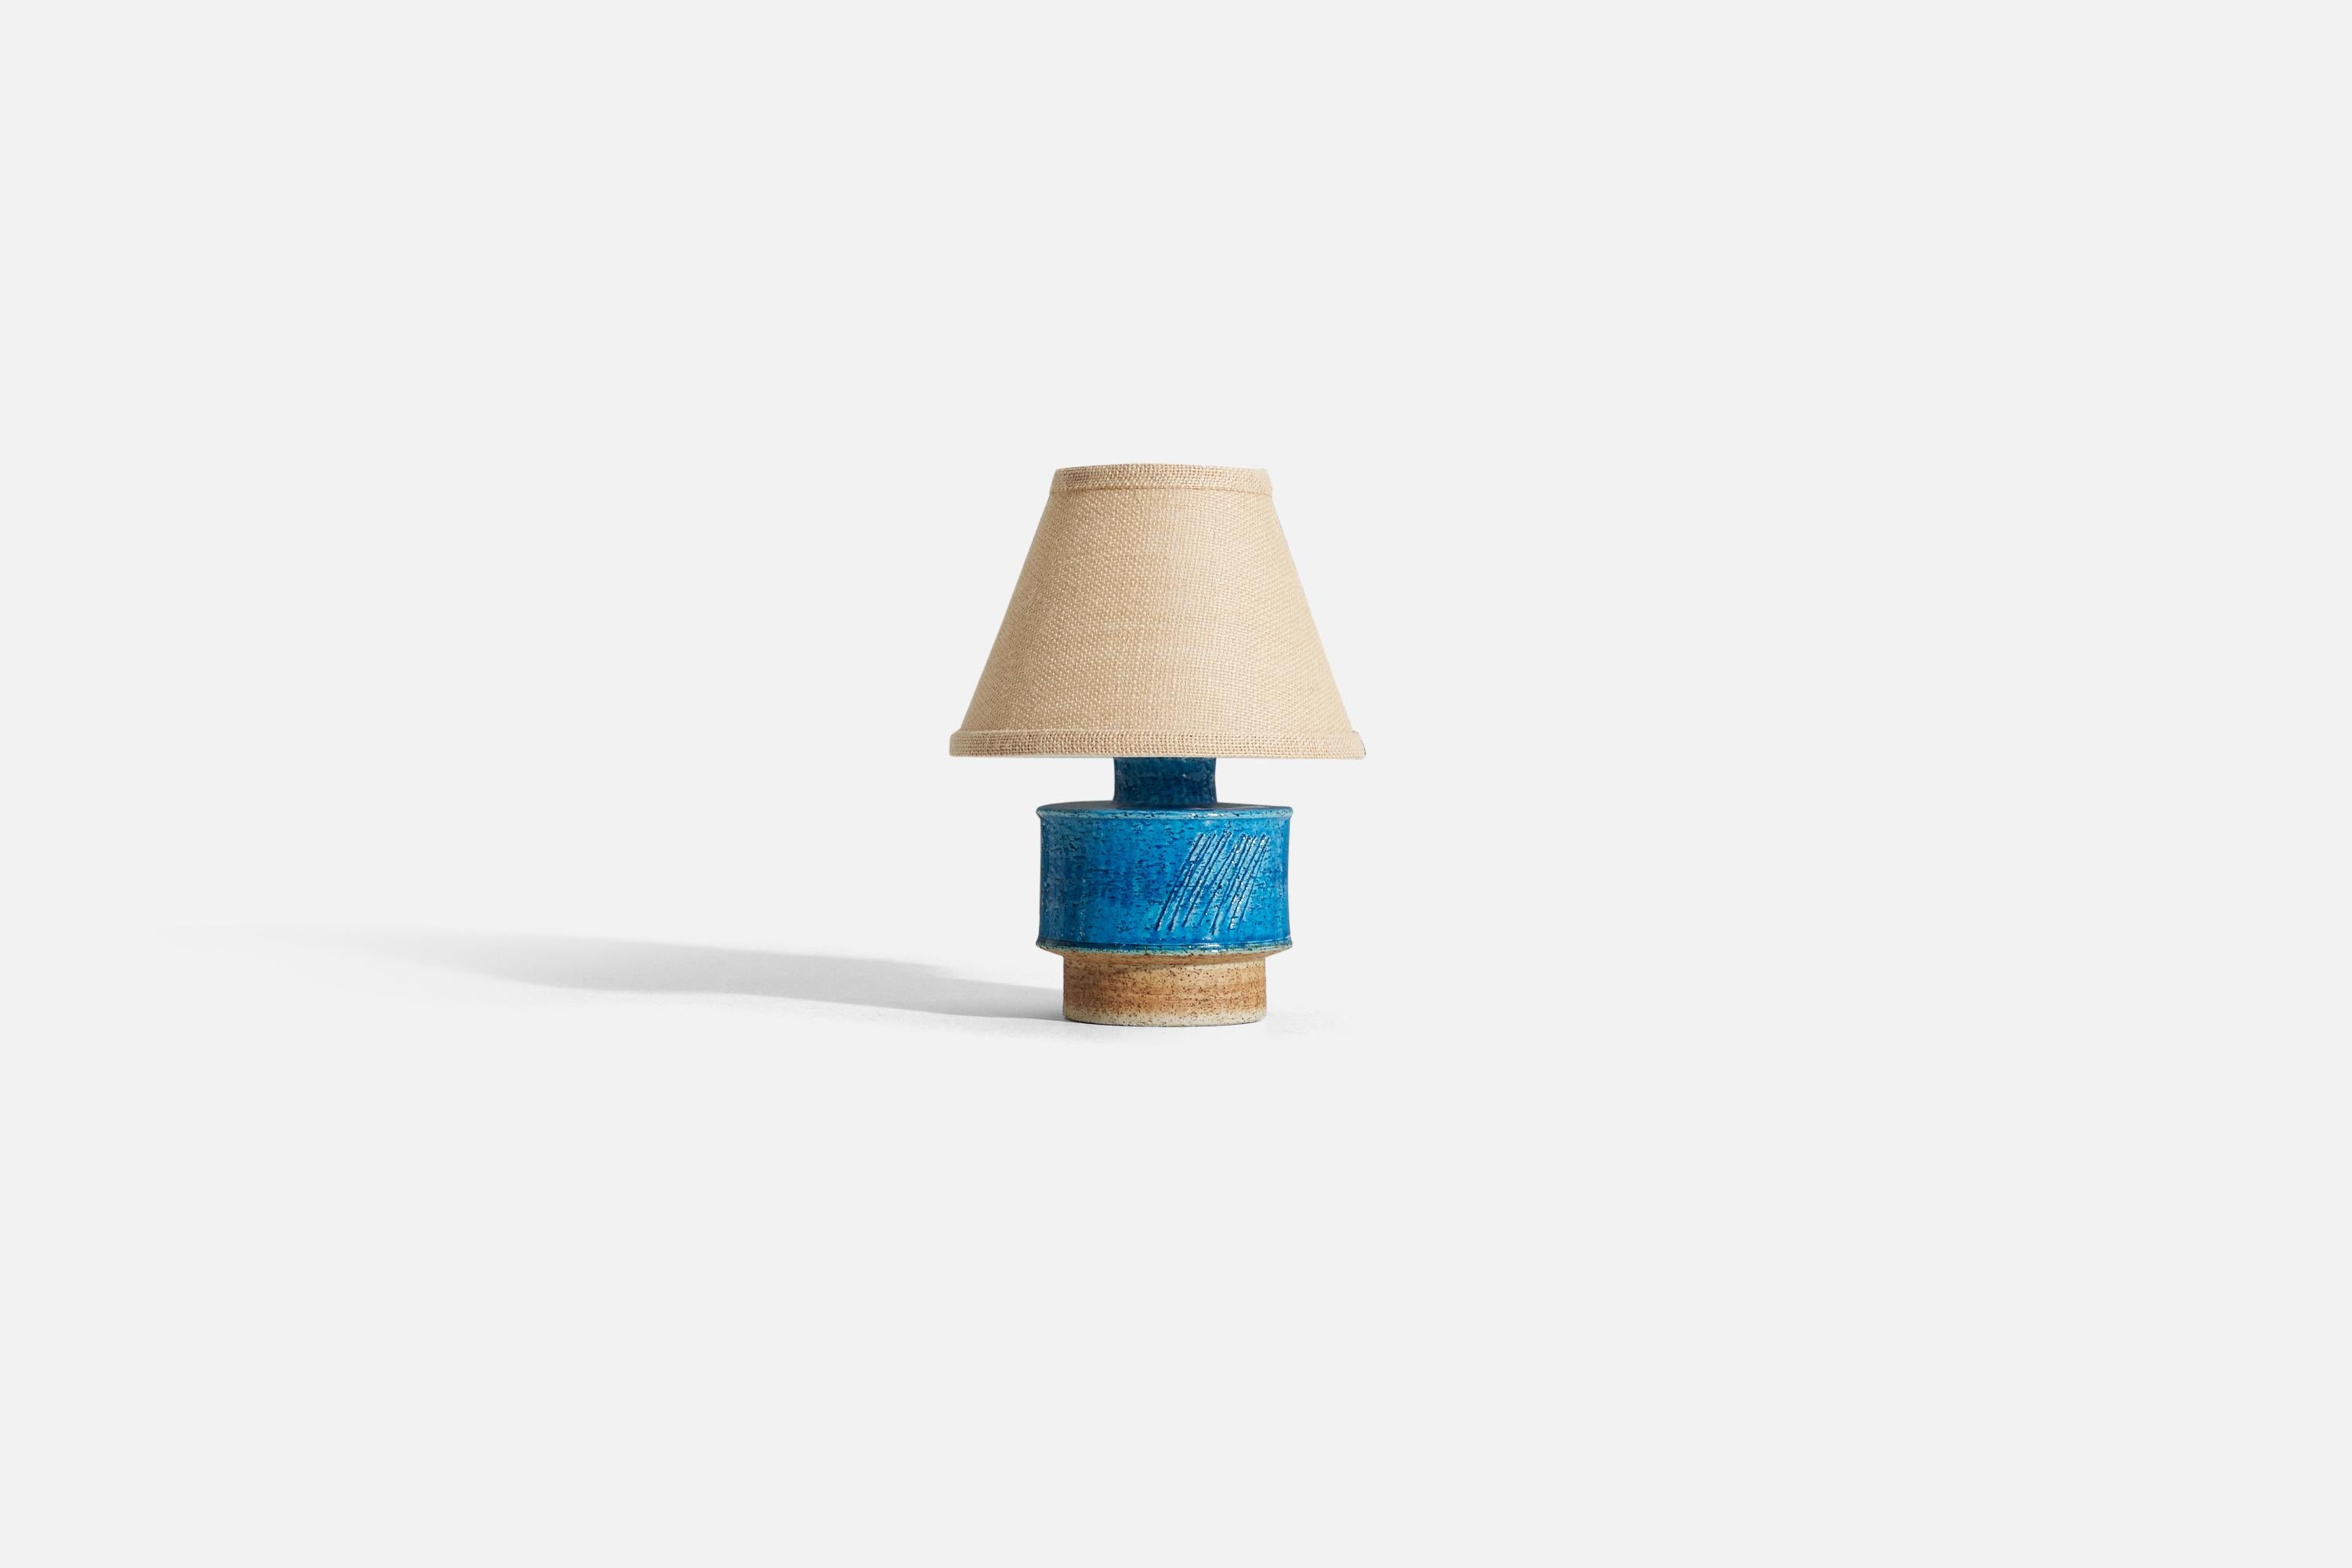 A blue glazed stoneware table lamp designed by Inger Persson, produced by Rörstrand c. 1960s

Sold without lampshade. 

Dimensions of lamp (inches) : 8 x 5 x 5 (H x W x D)
Dimensions shade (inches) : 4.25 x 8.25 x 6 (T x B x H)
Dimension of